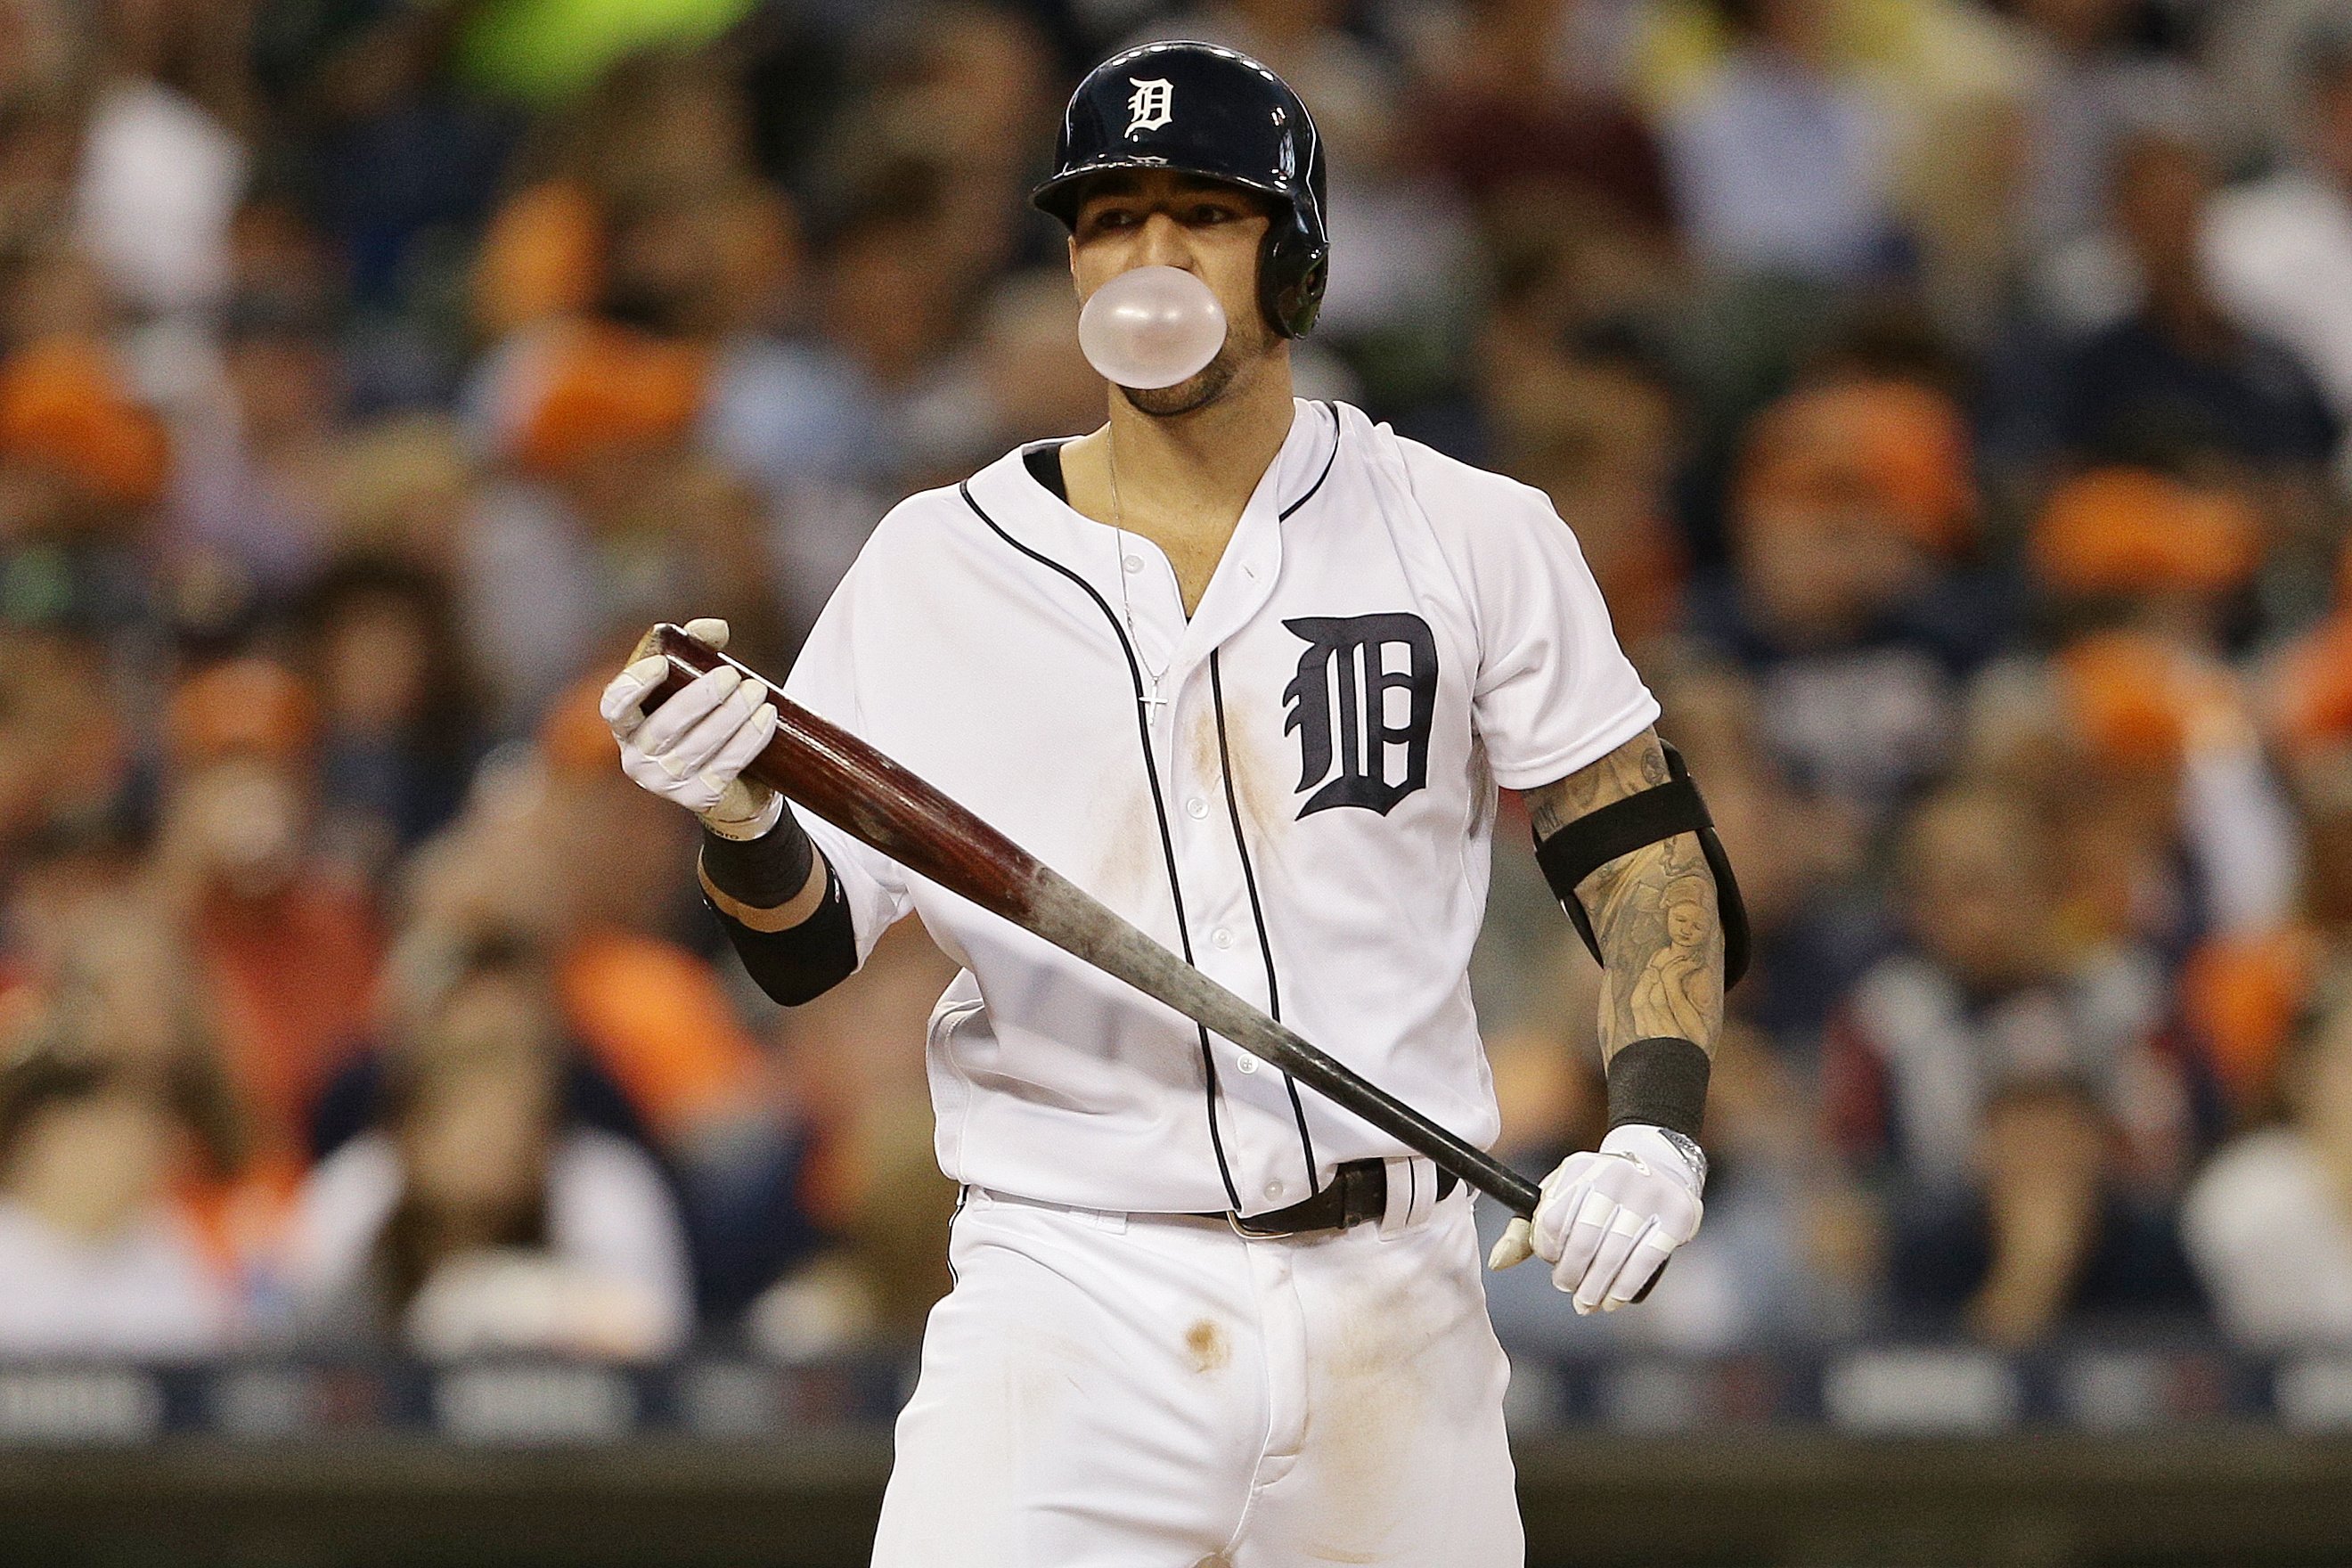 Could Nicholas Castellanos be a free agent option for the Yankees